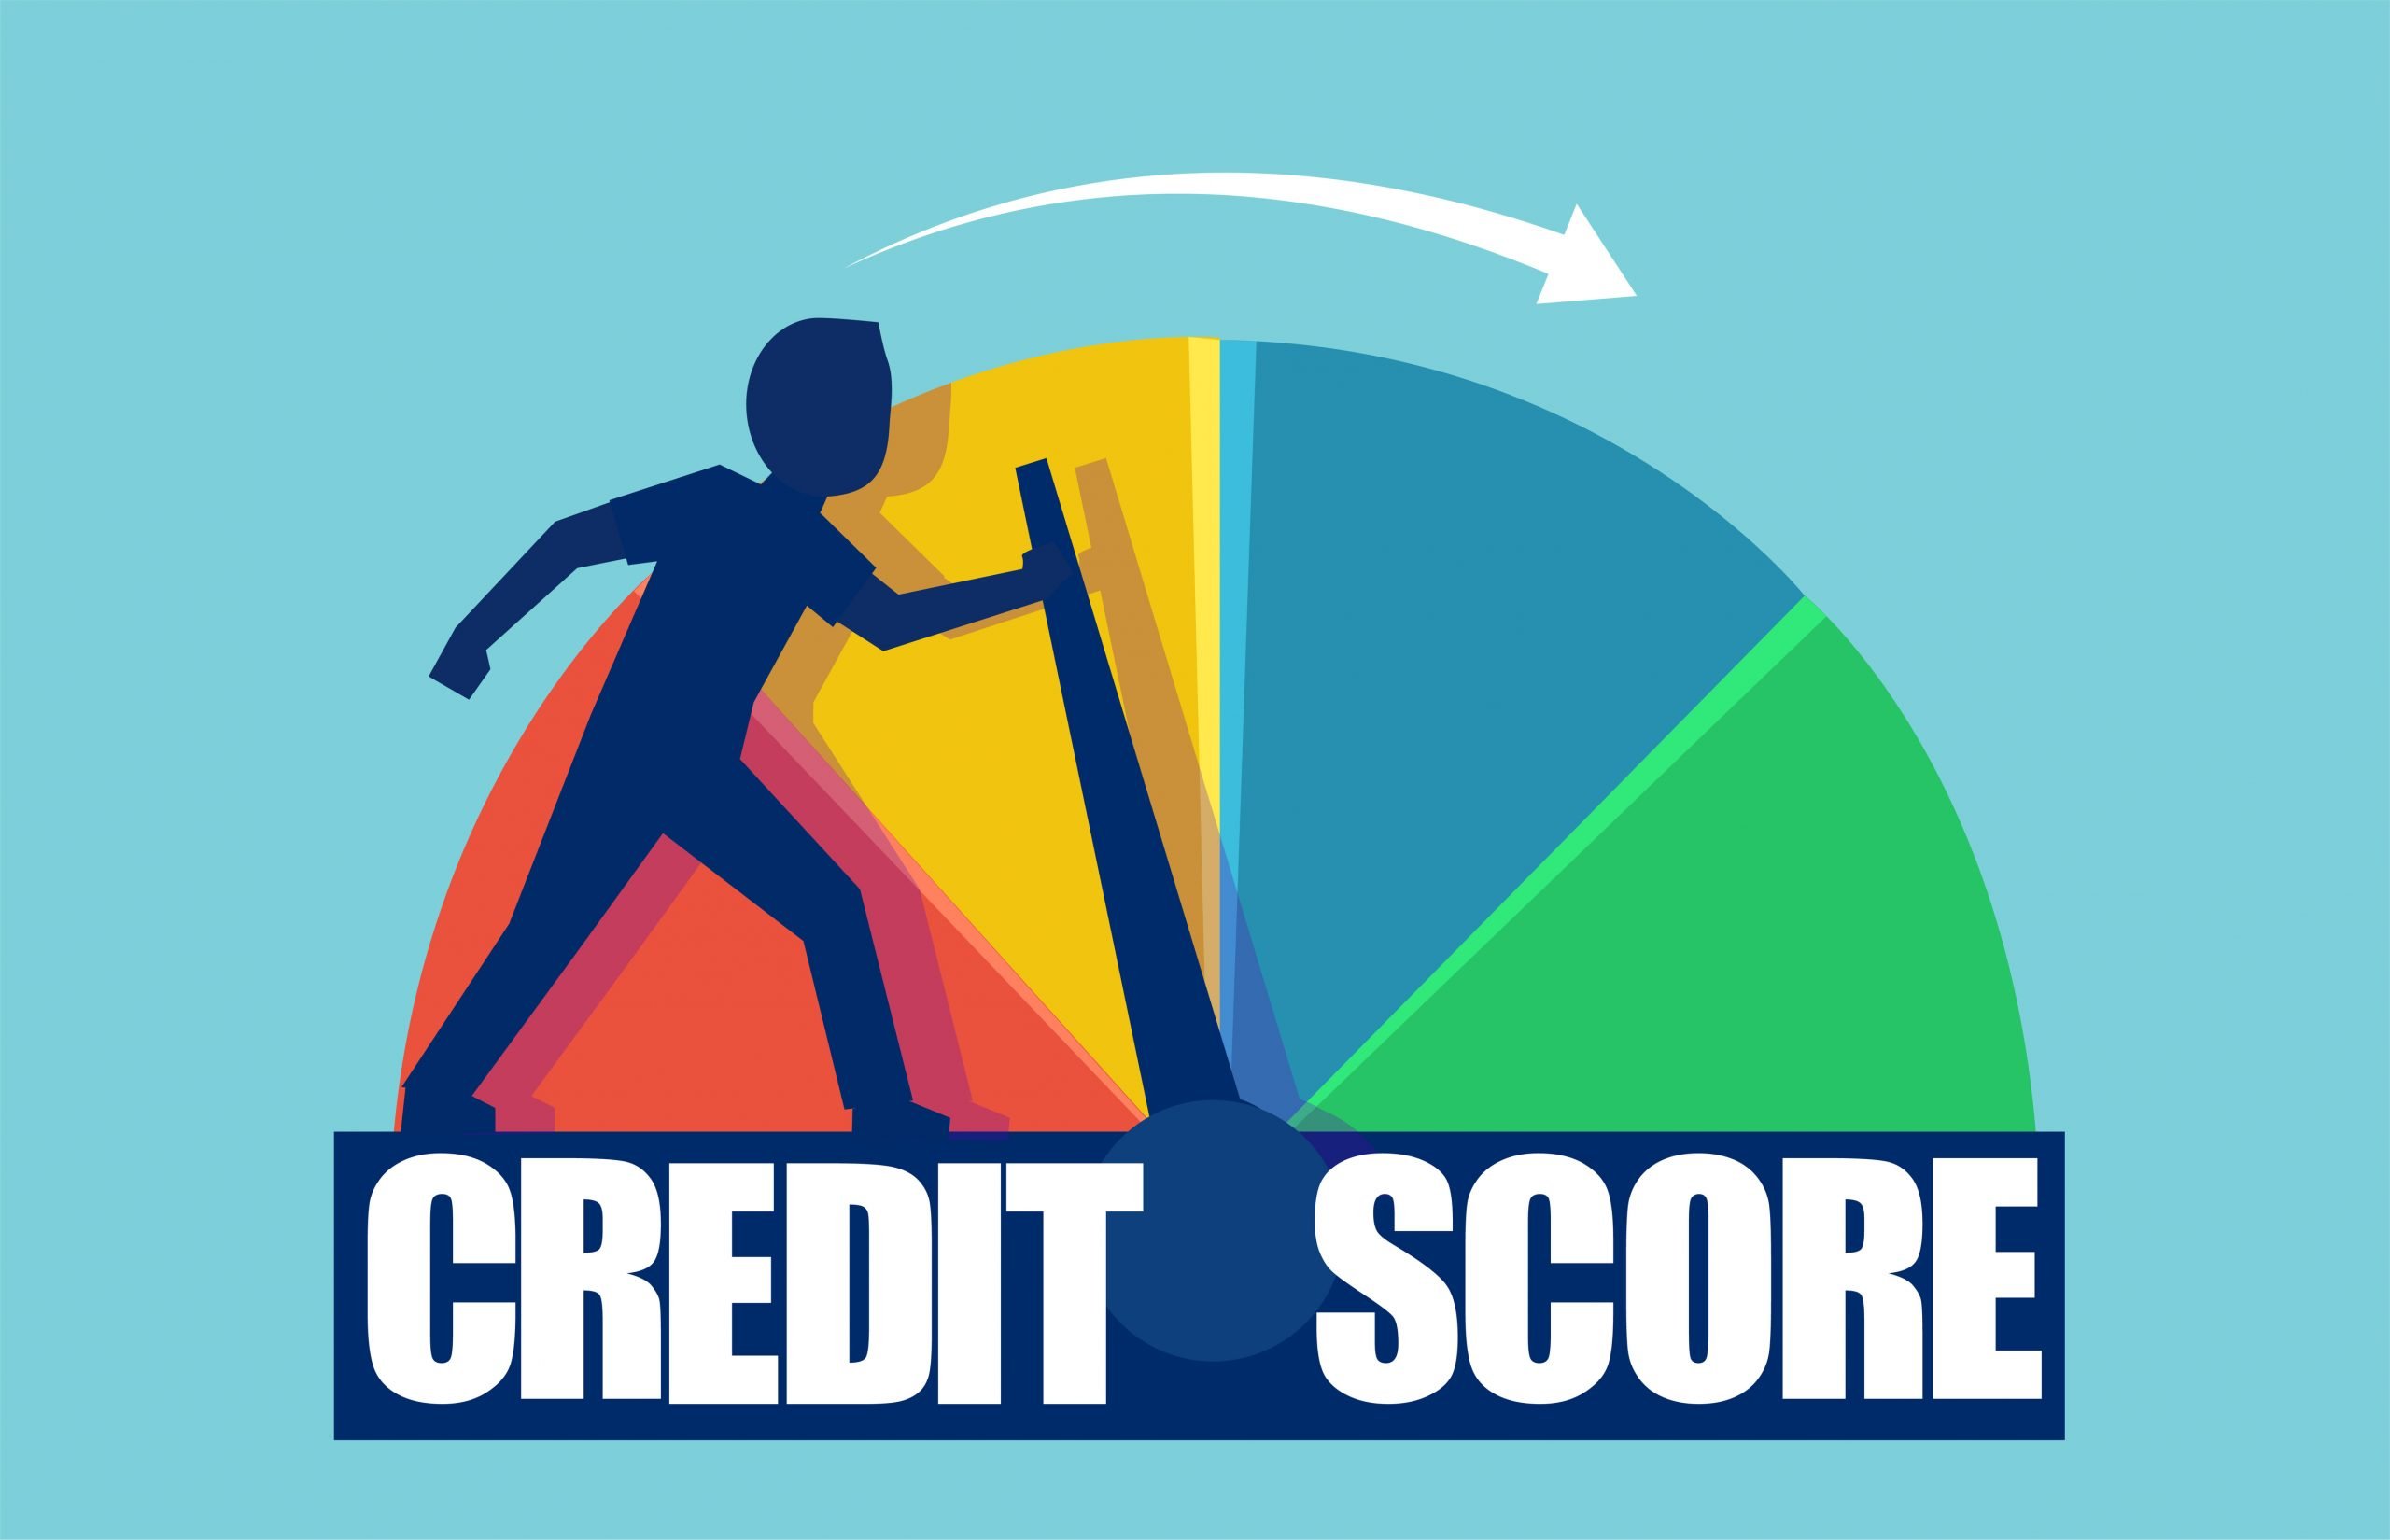 Credit score concept. Vector of a businessman pushing scale changing credit information from poor to good.